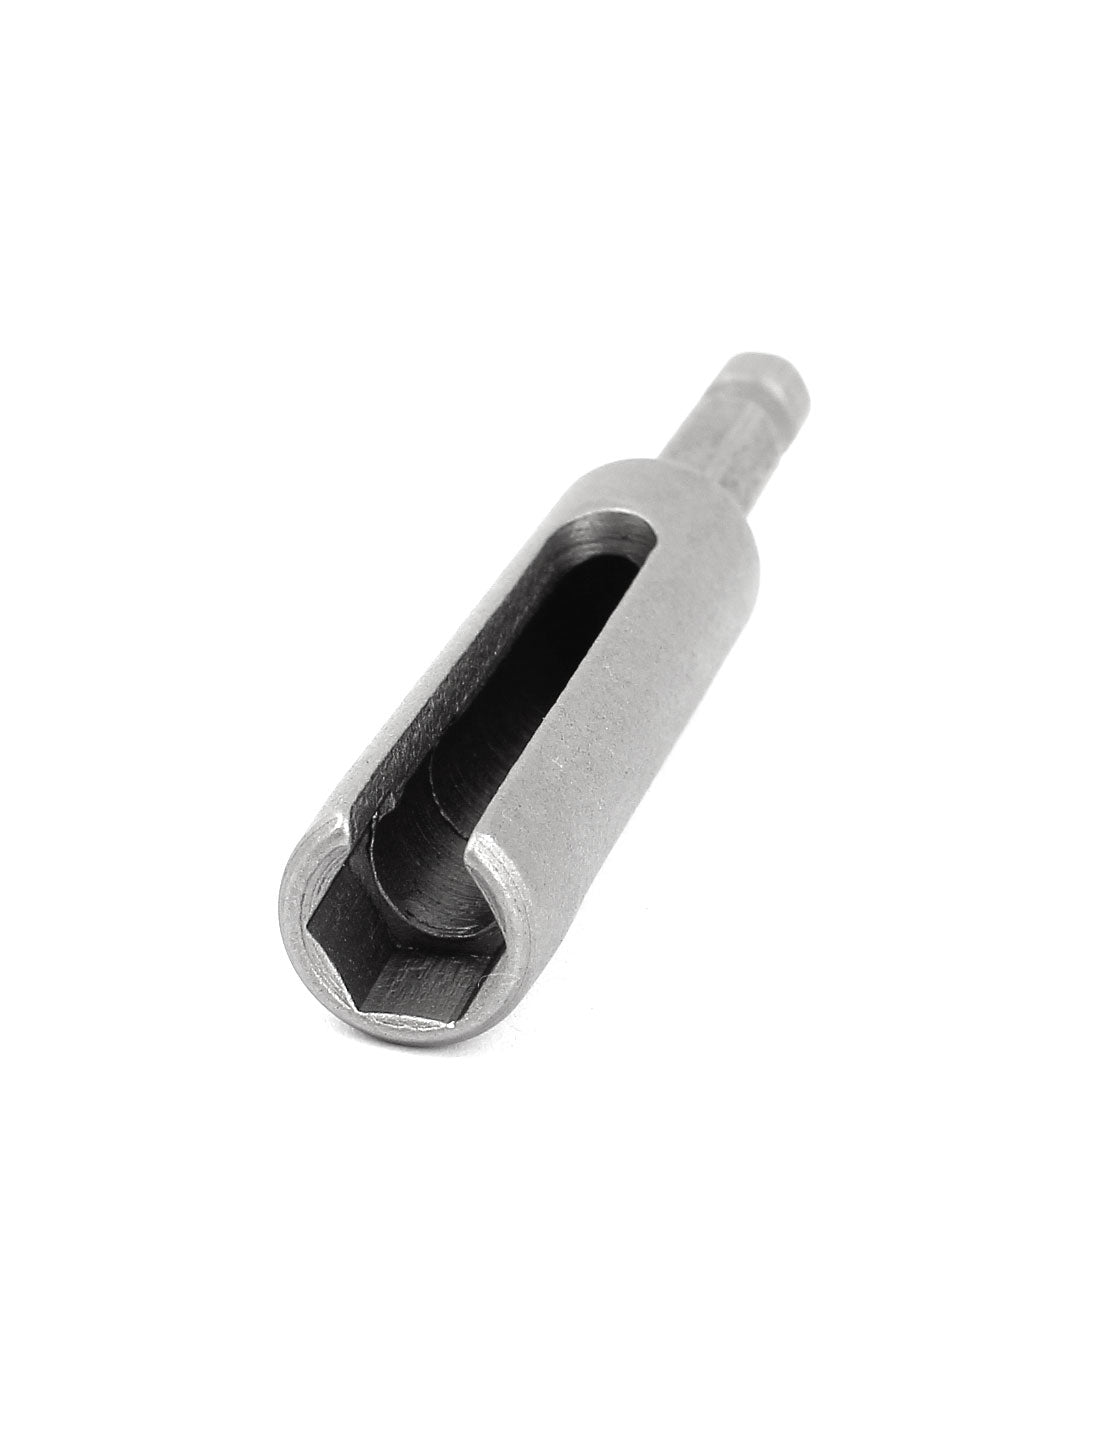 uxcell Uxcell 80mm Length 8mm Hex Nut Socket Slotted Extension Driver Bit Power Tool